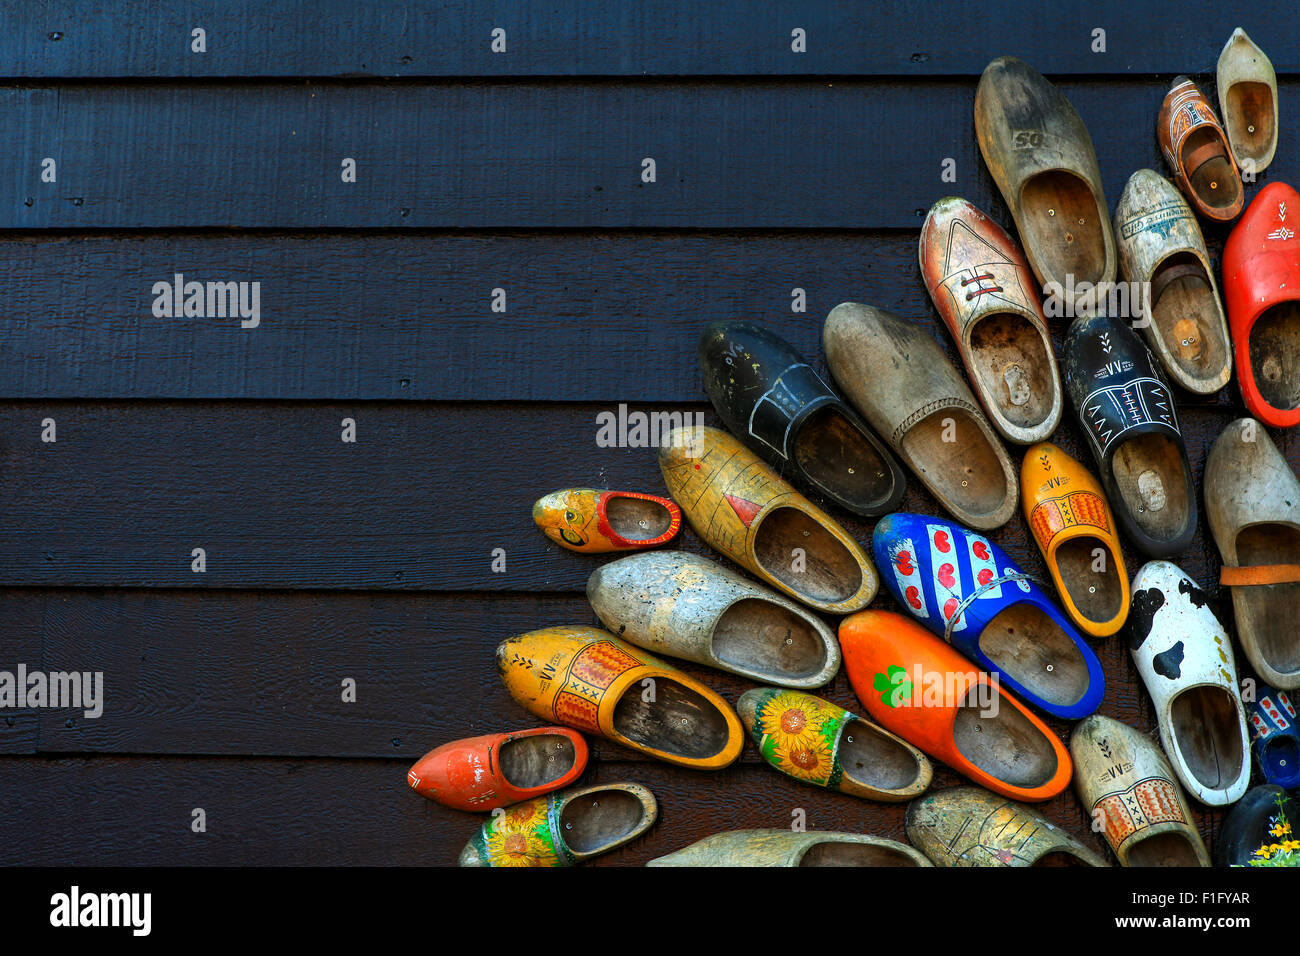 Colorful wooden clogs on dark wooden panels Stock Photo